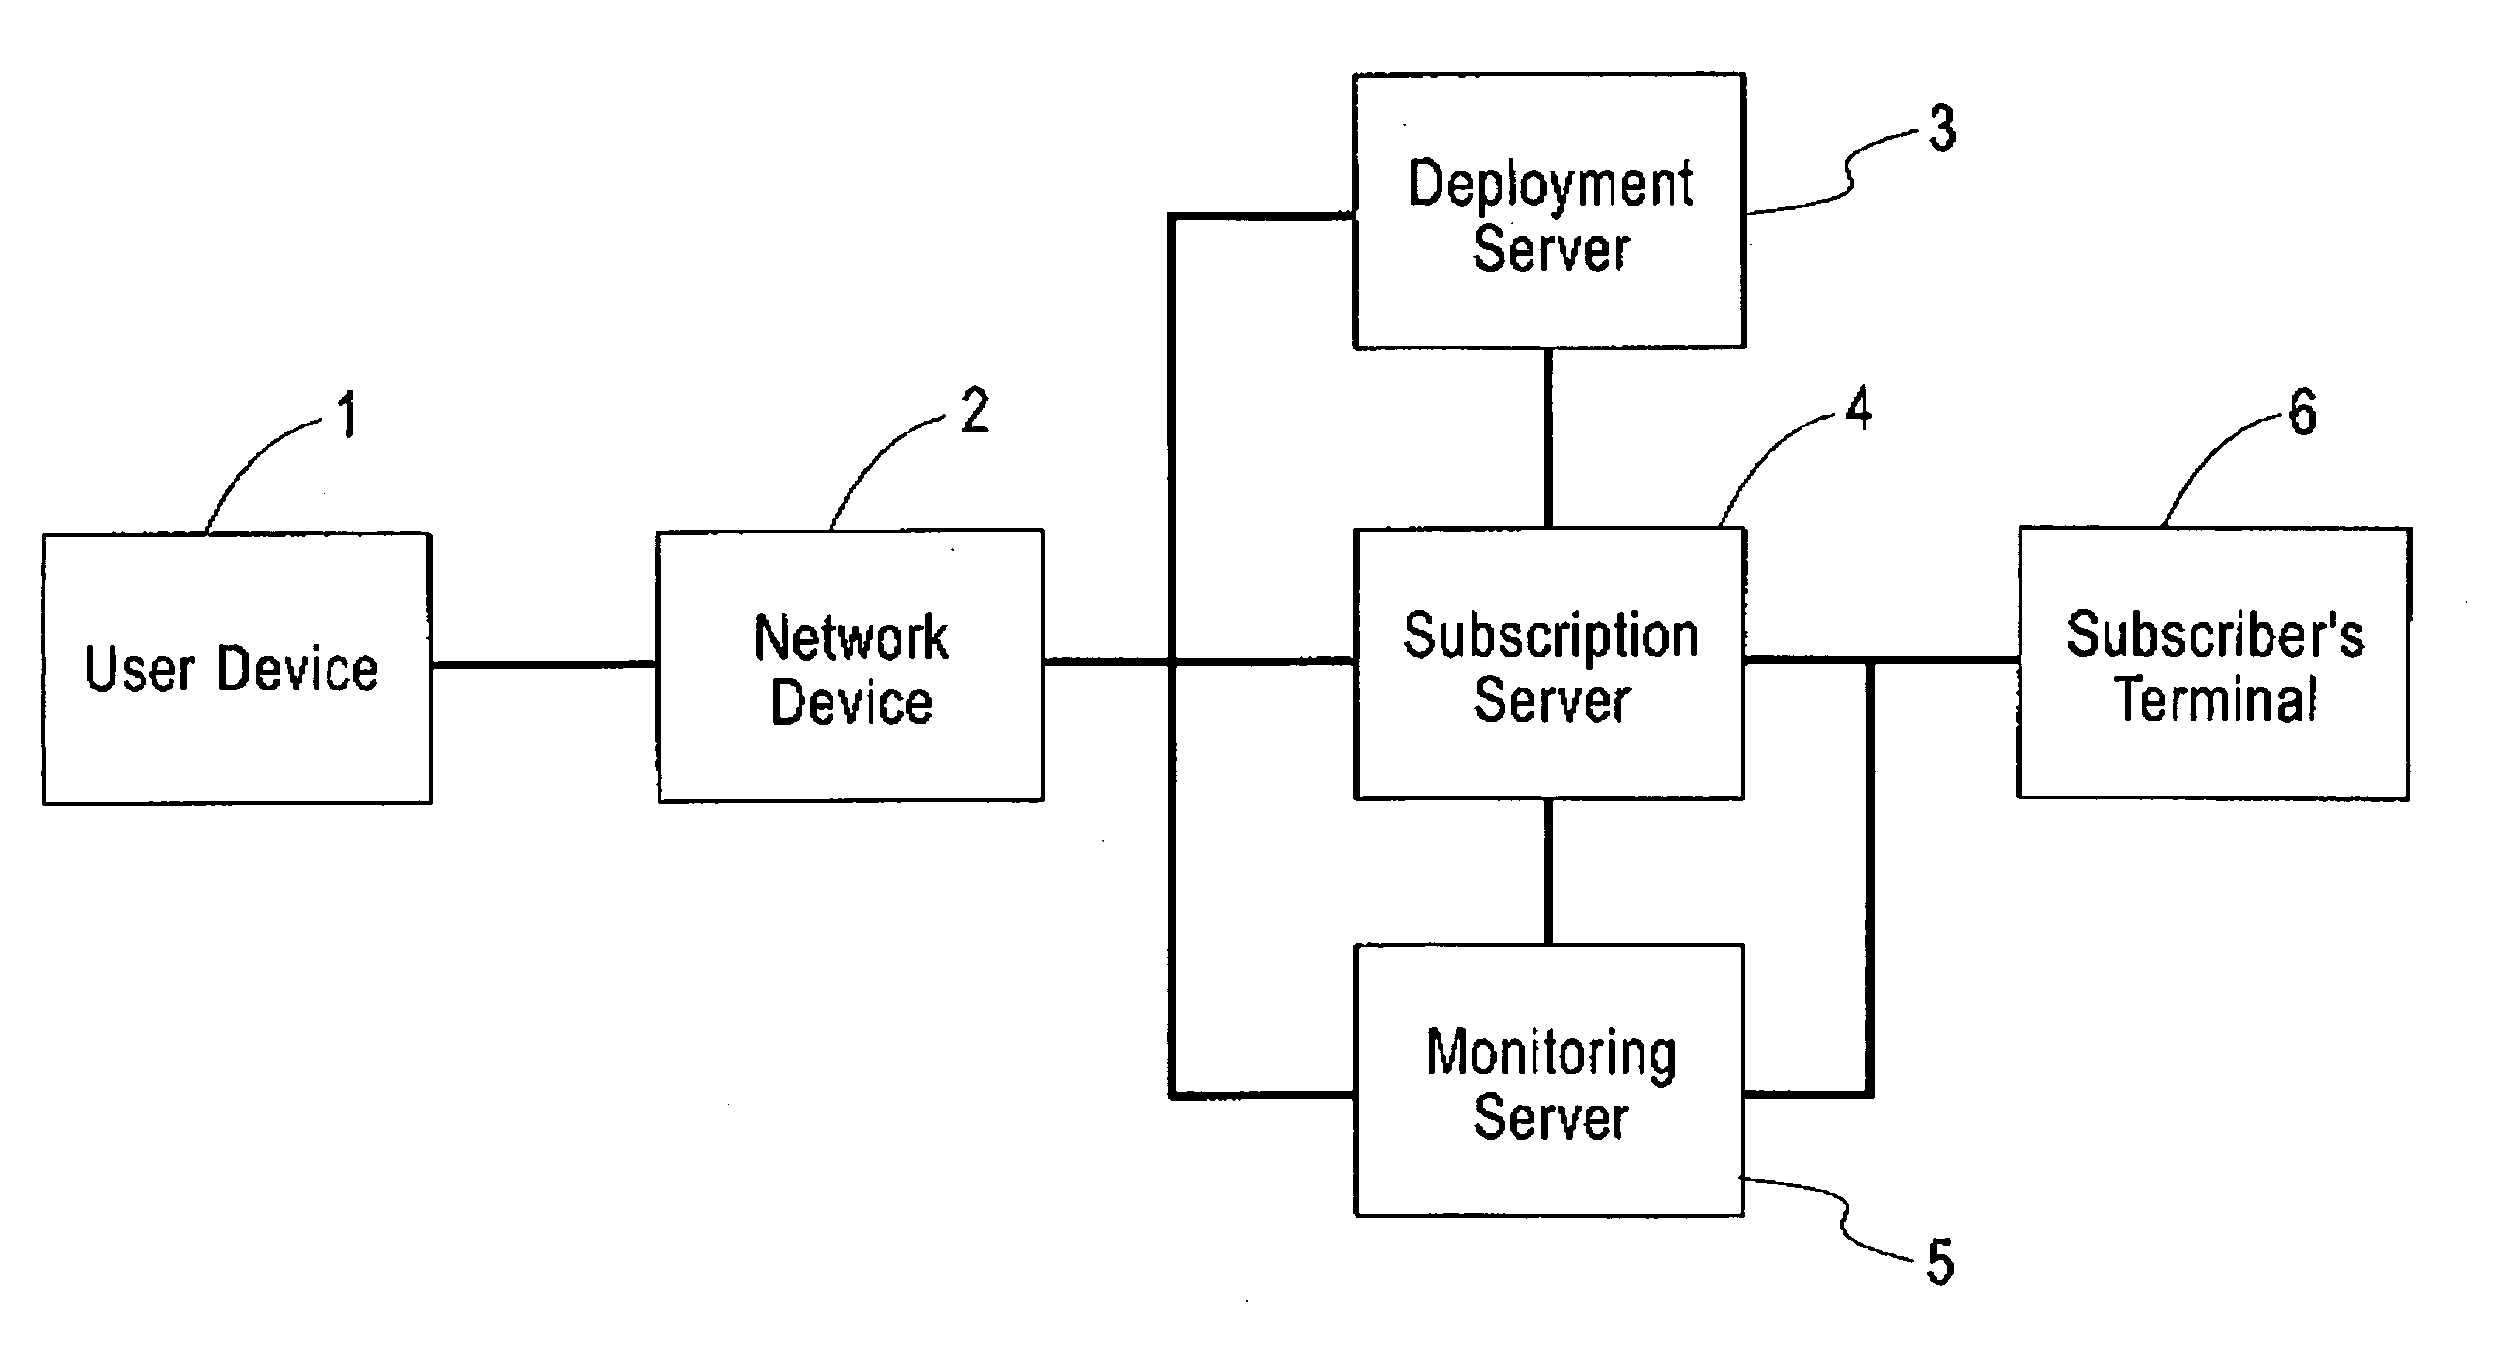 Services for capturing and modeling computer usage